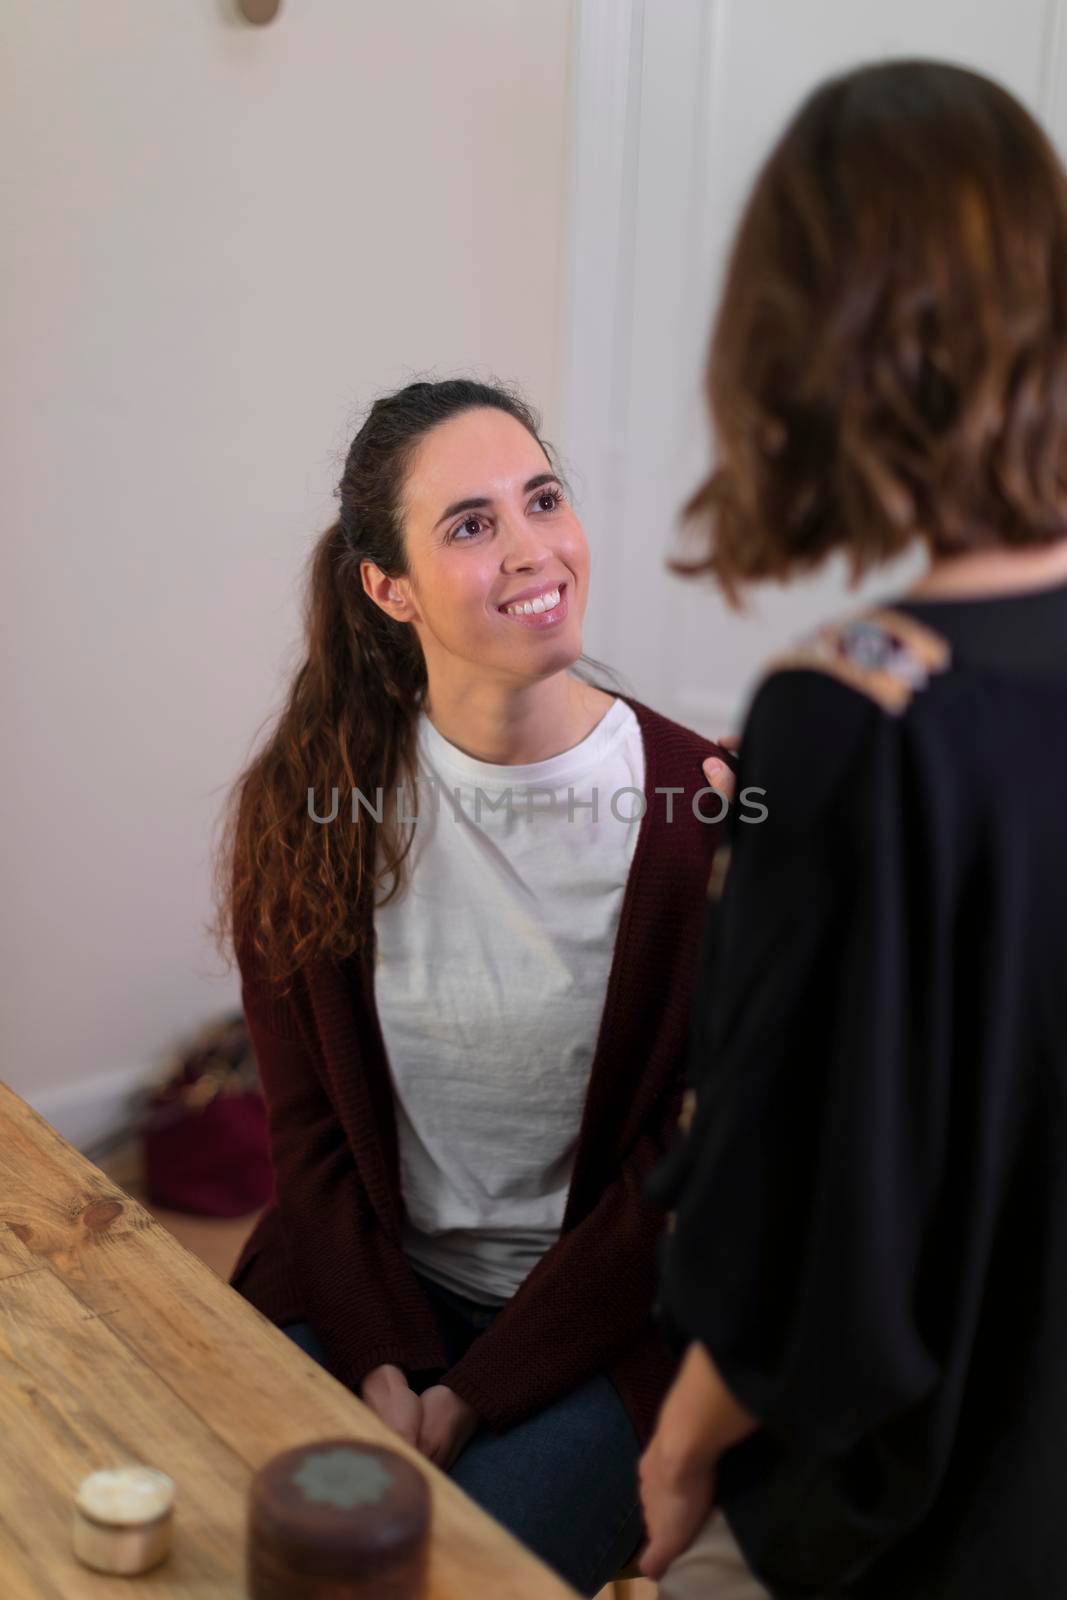 A female patient looks with joy to her therapist during an interview to resolve her health issues